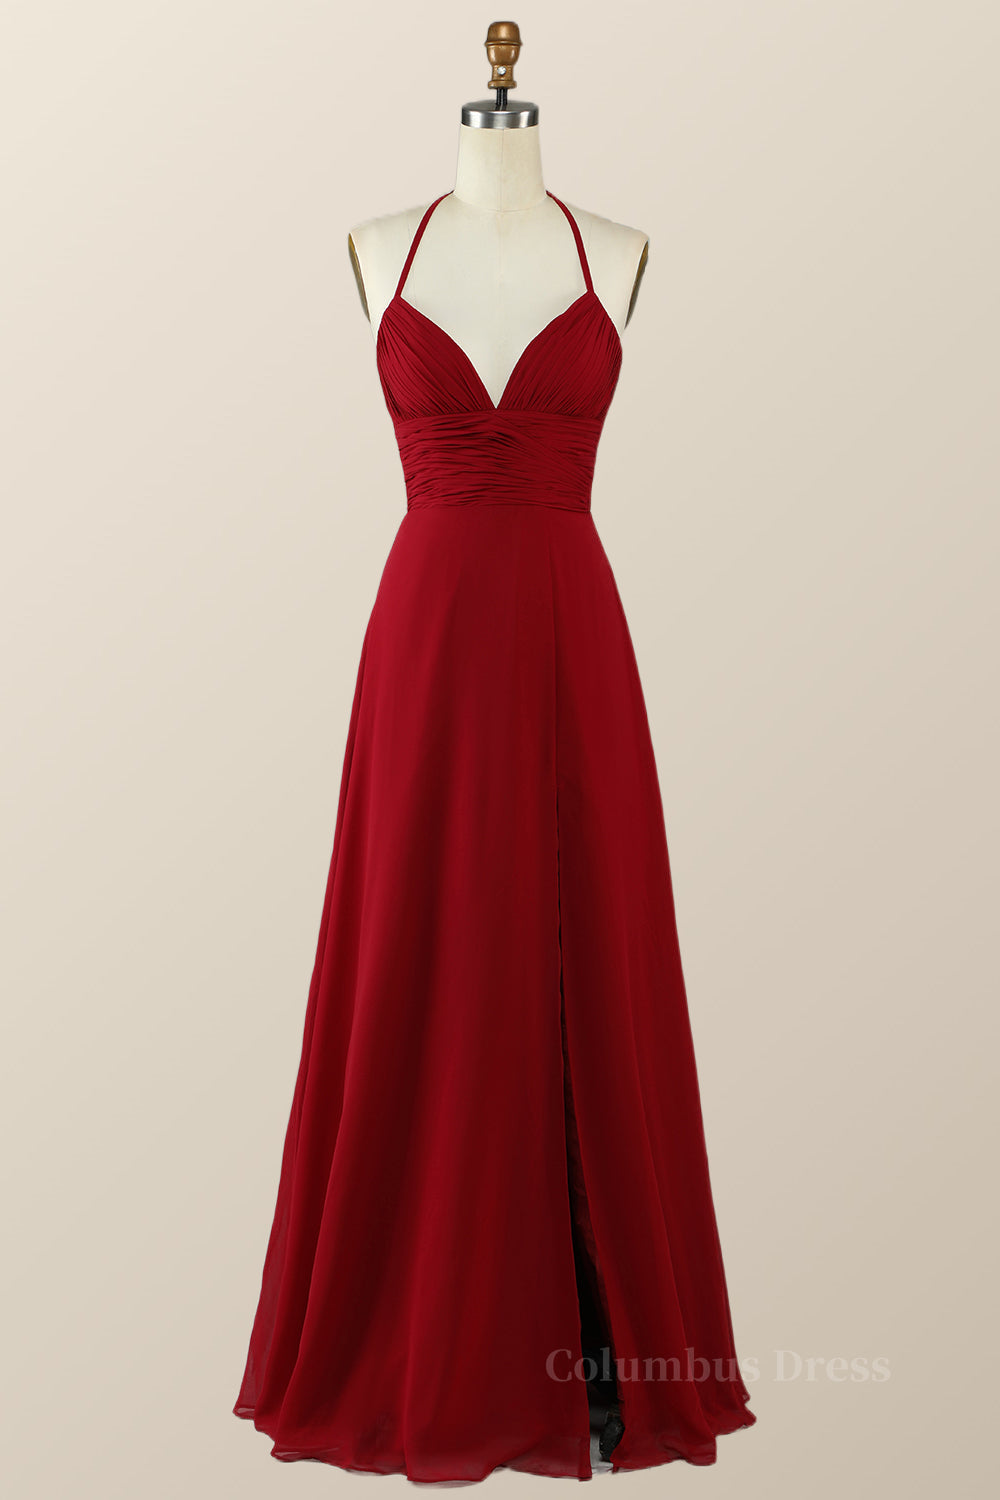 Halter Wine Red Empire A-line Long Corset Bridesmaid Dress outfit, White Prom Dress